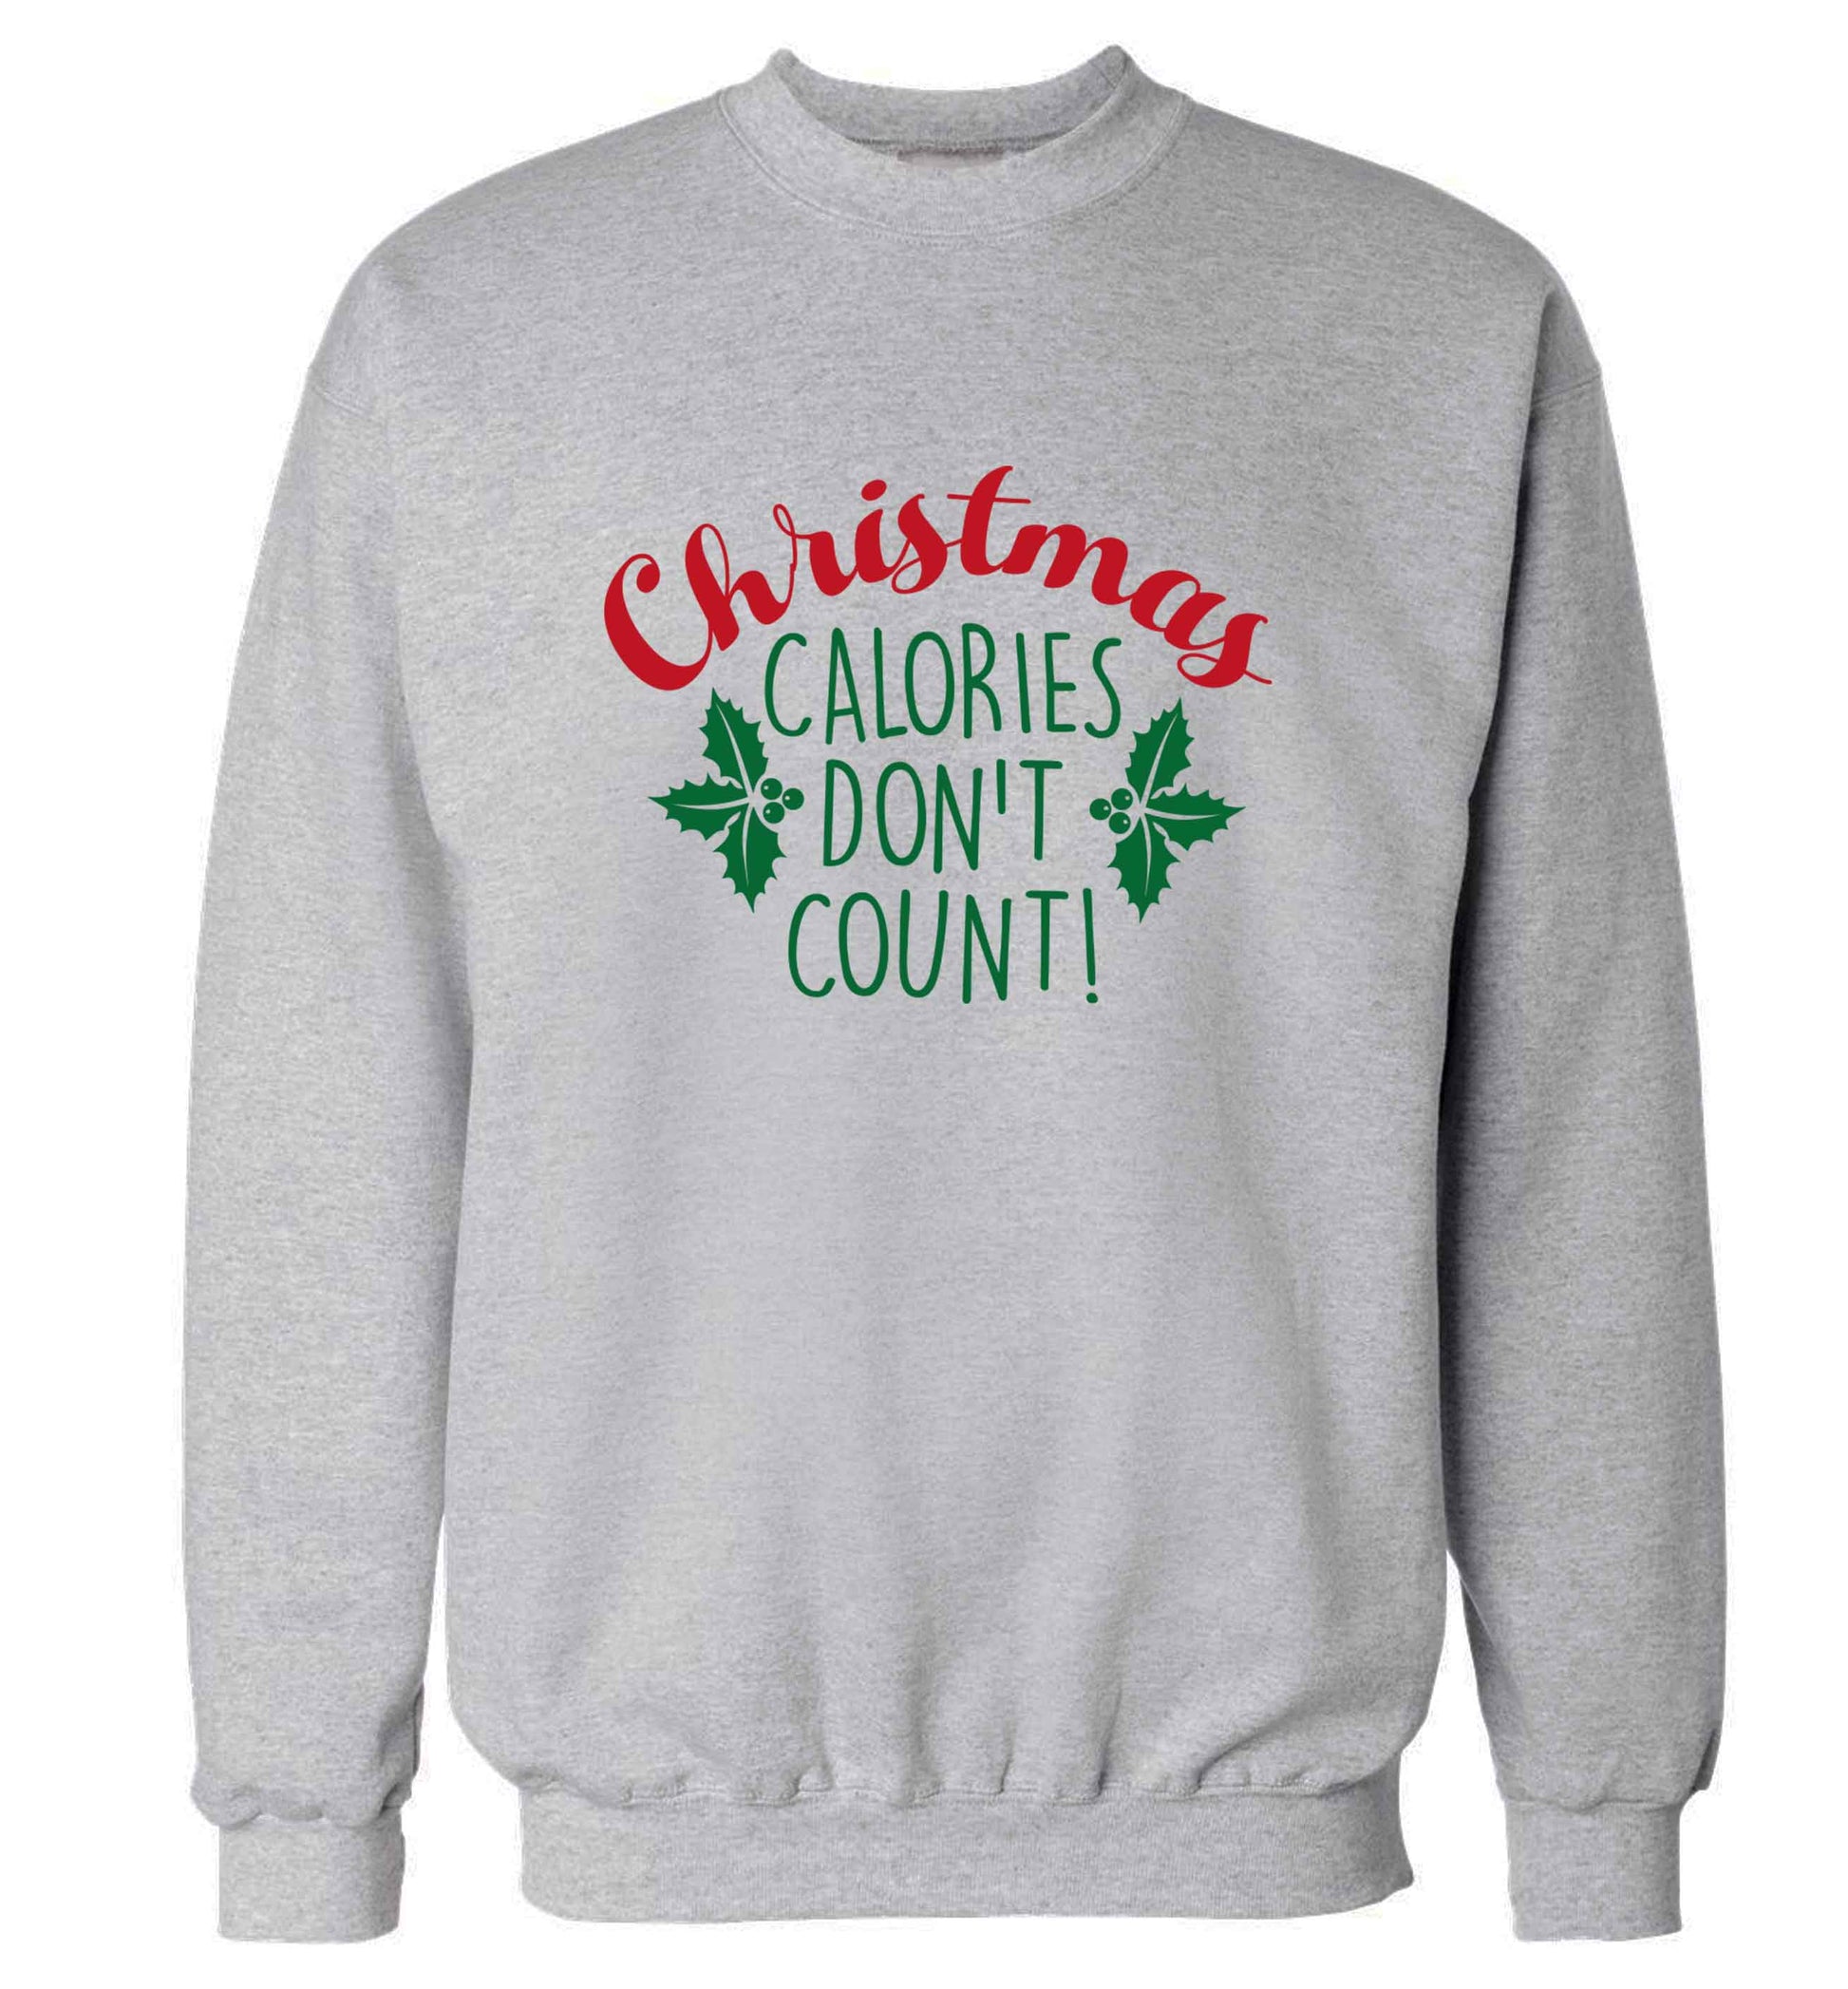 Christmas calories don't count adult's unisex grey sweater 2XL